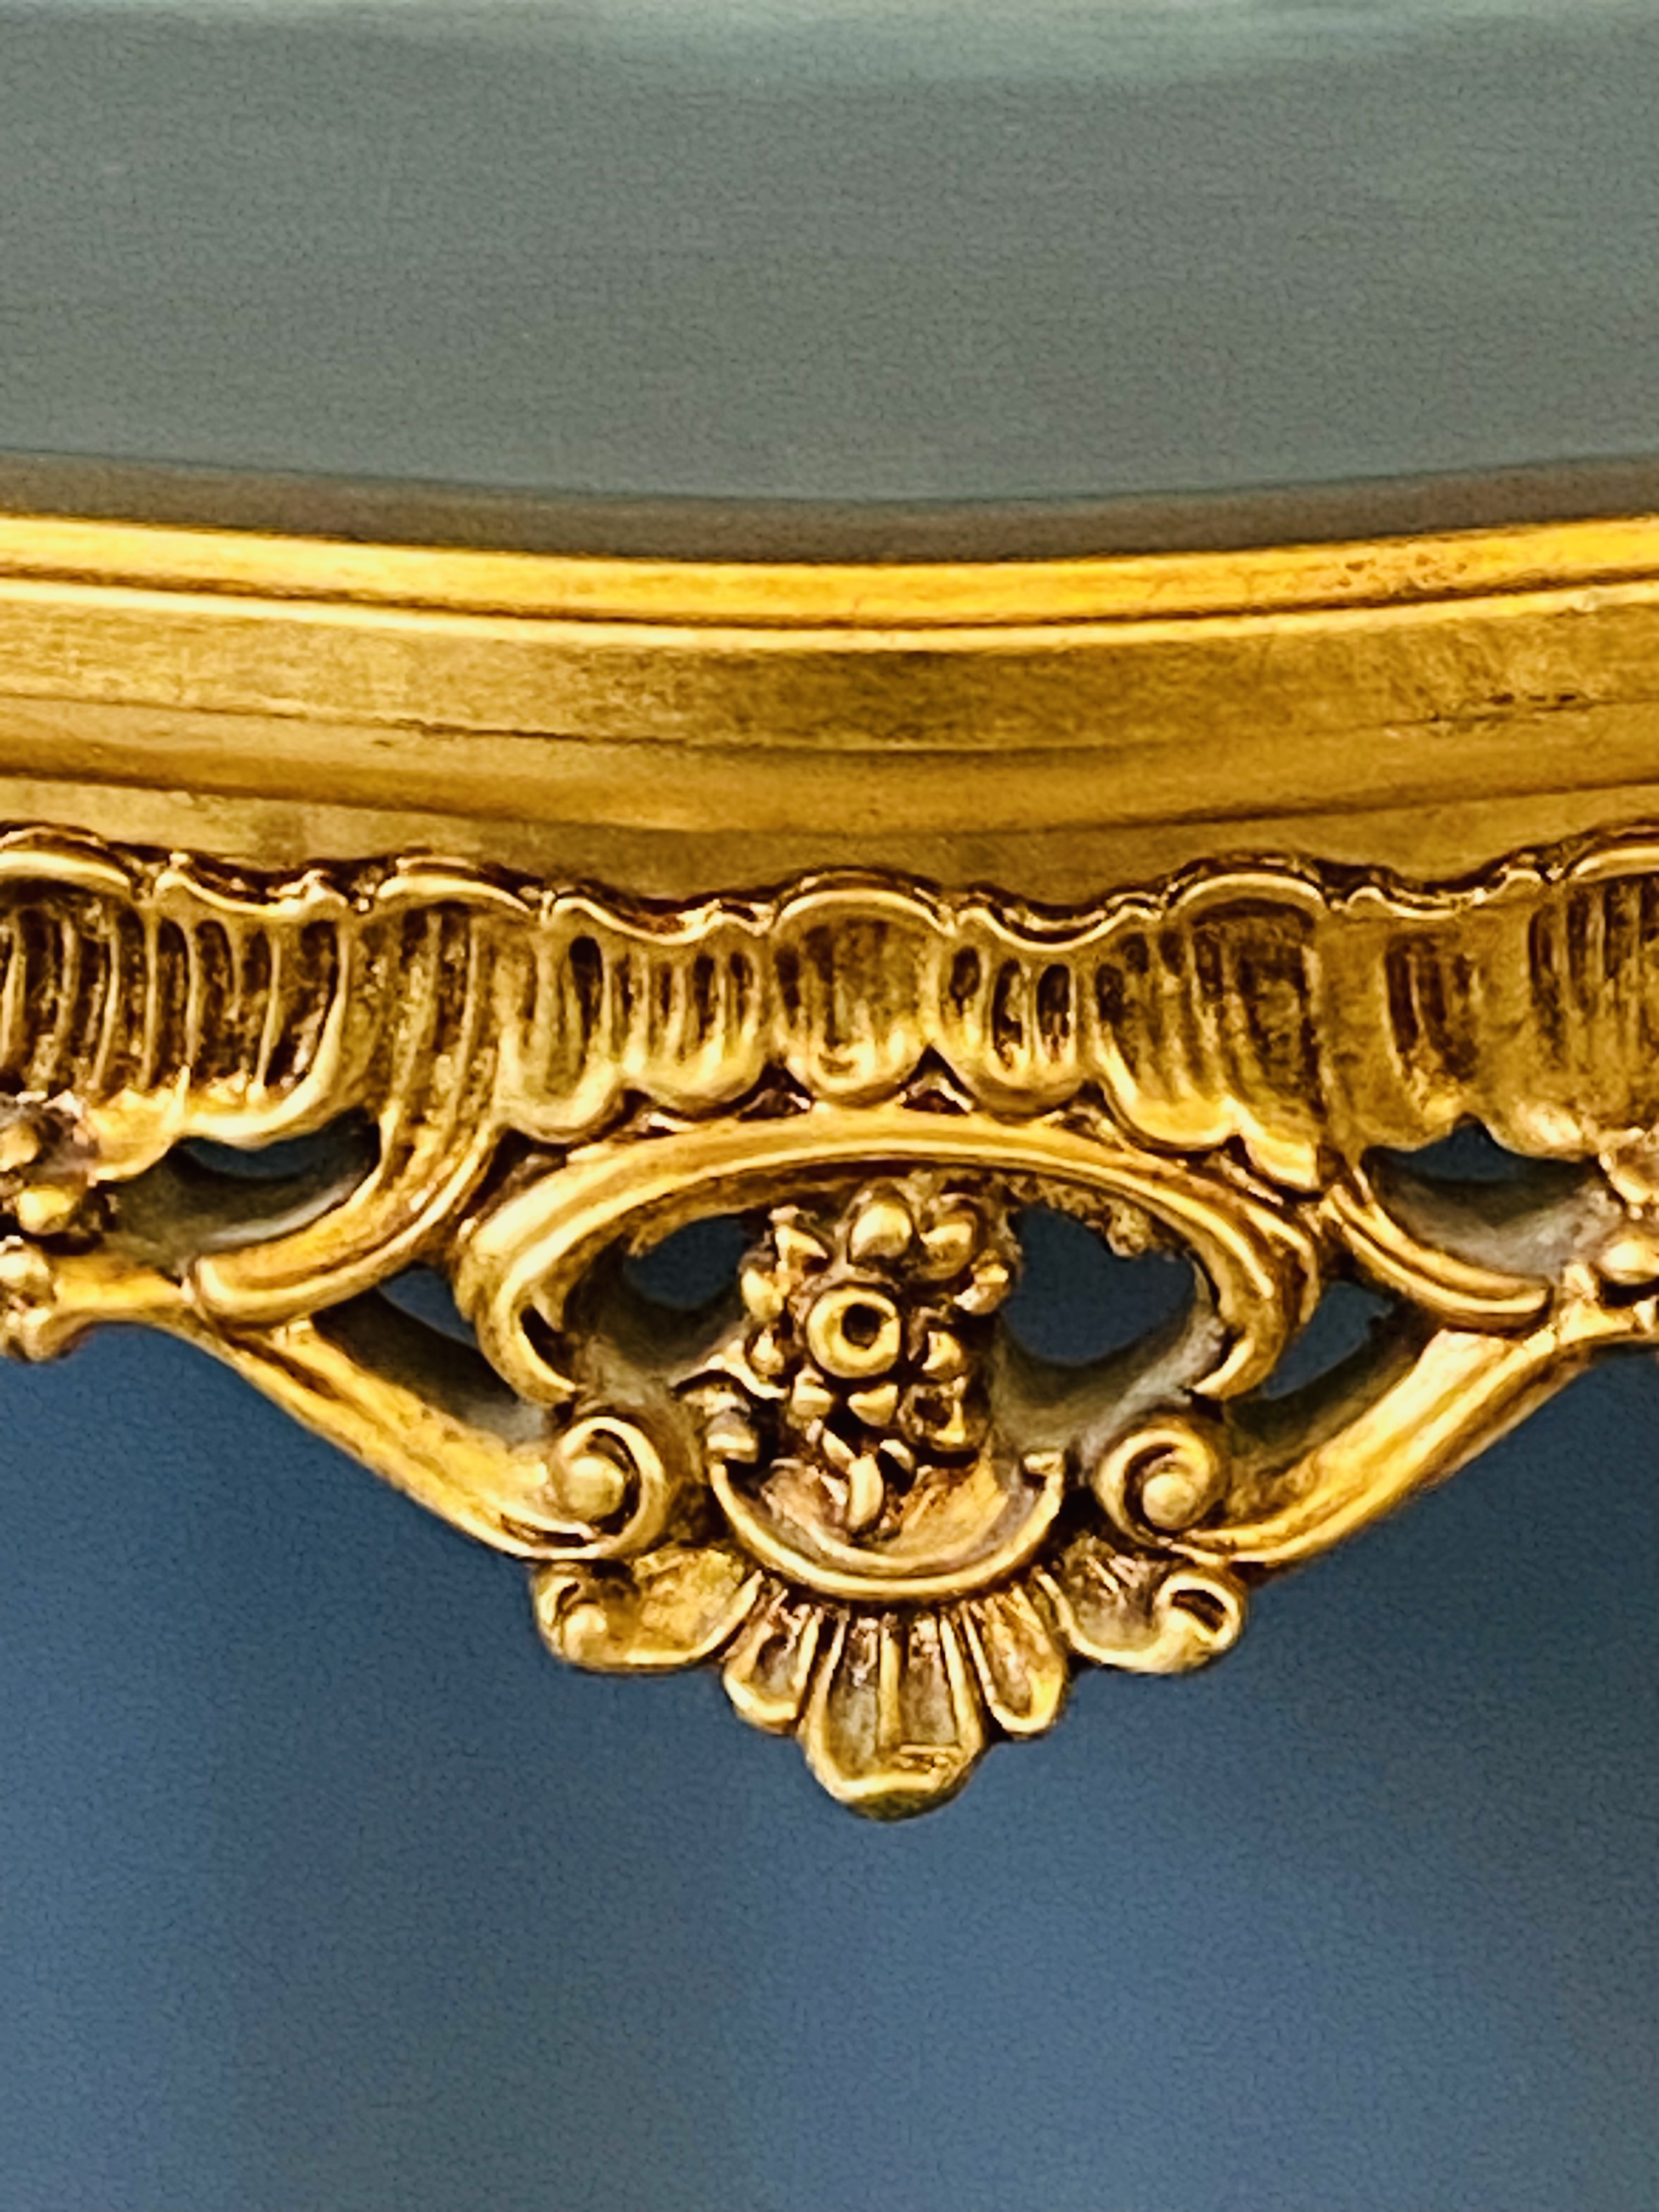 Serpentine carved giltwood console table - Image 3 of 7